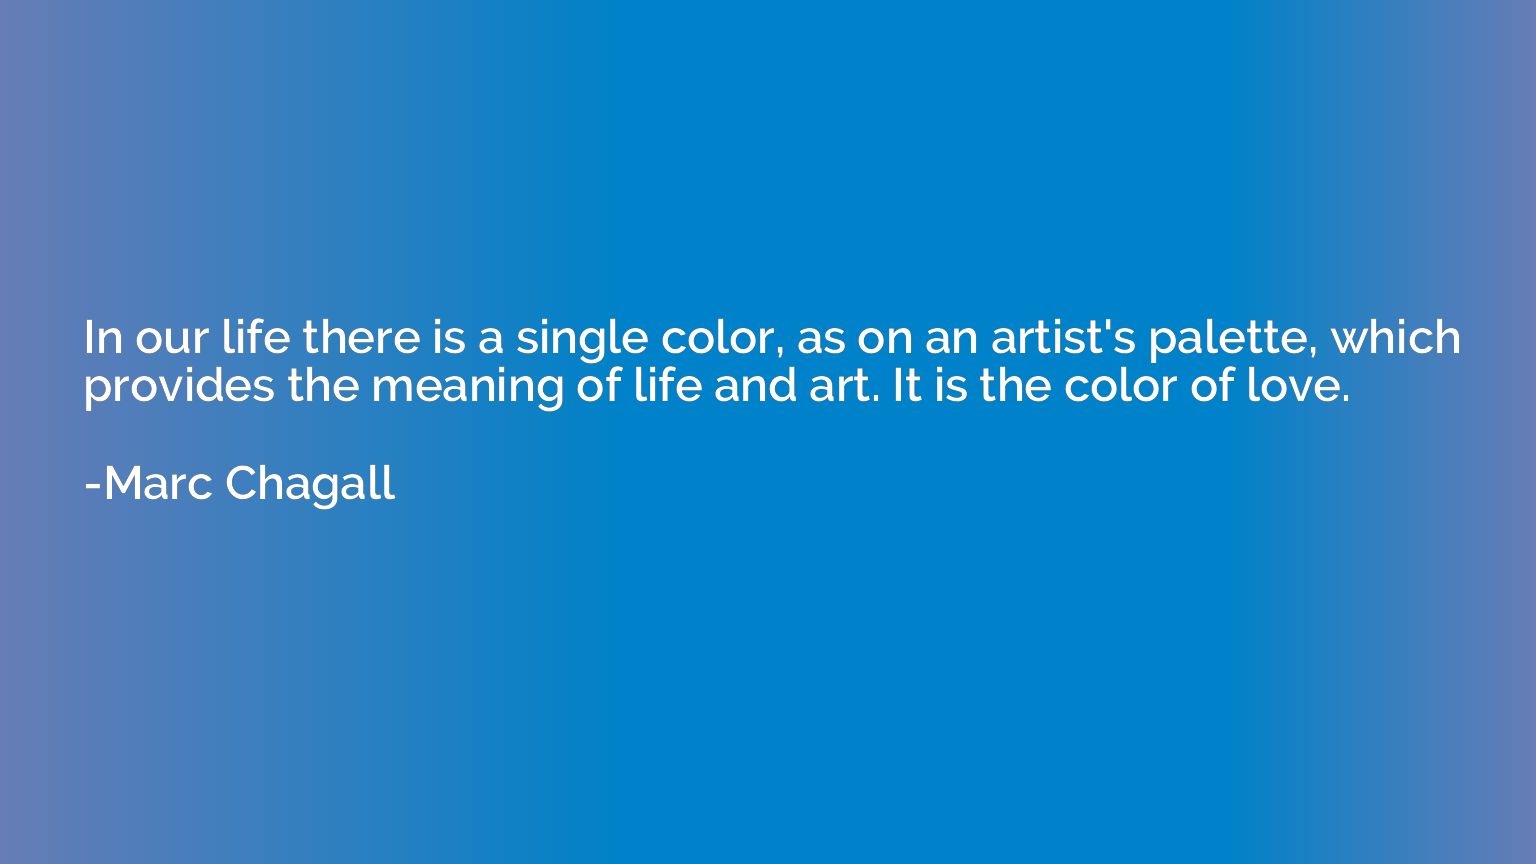 In our life there is a single color, as on an artist's palet